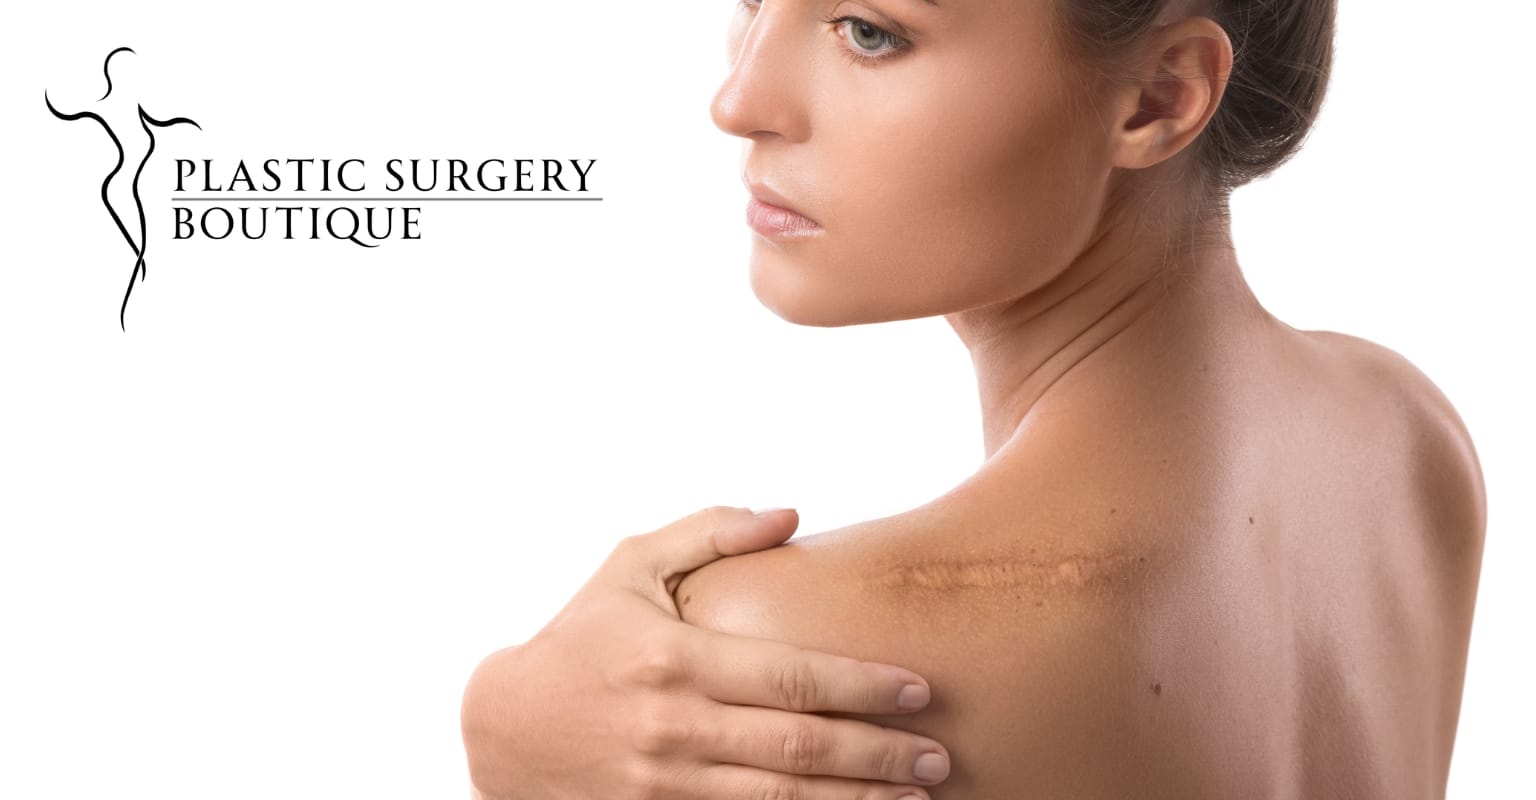 Scar revision surgery in Miami: Transform your confidence with Dr. Sophie, a double board-certified plastic surgeon